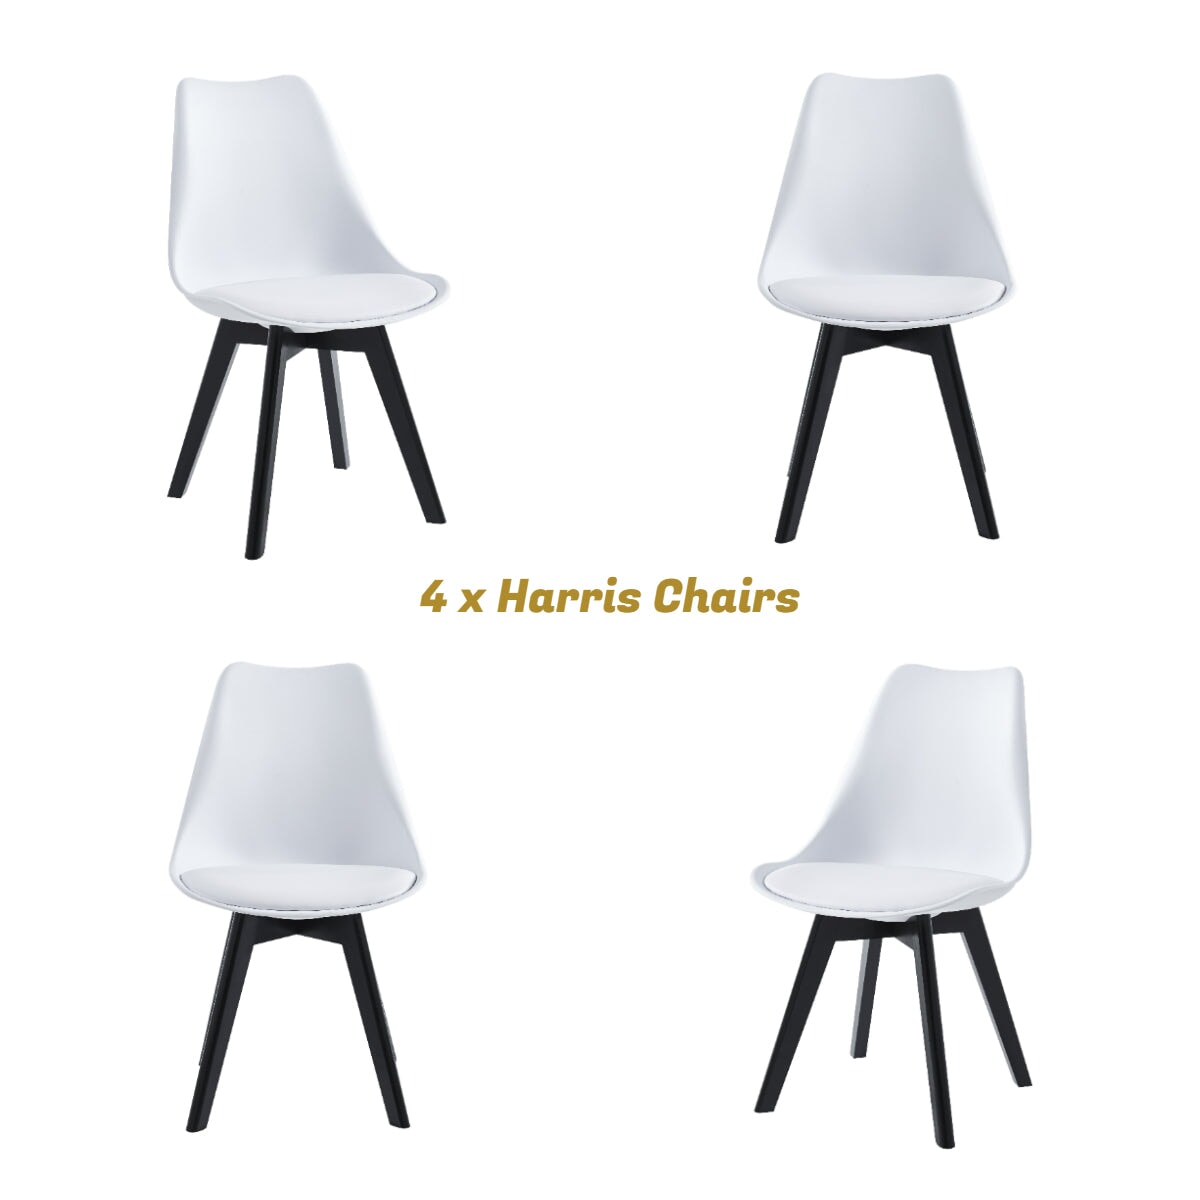 4 x Harris Ergonomic Dining Chairs - White Chairs with Black Wooden Legs Casa Maria Designs 